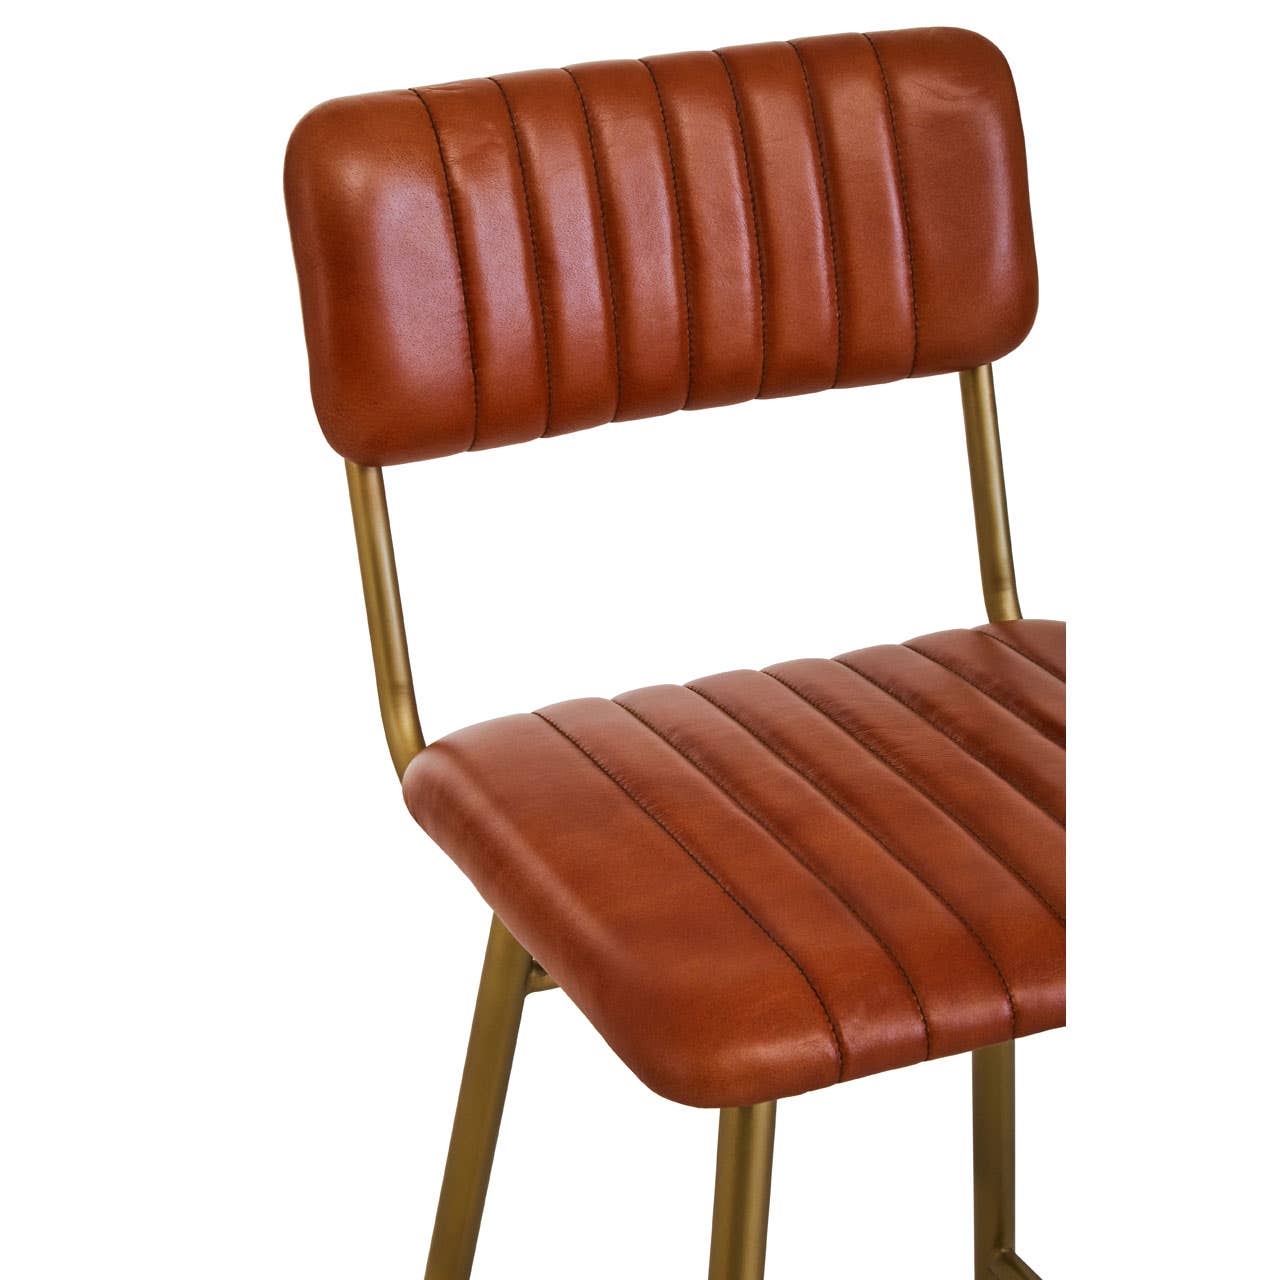 Piccadilly Toffee Tan Tufted Buffalo Leather Kitchen Bar Stool With Gold Legs